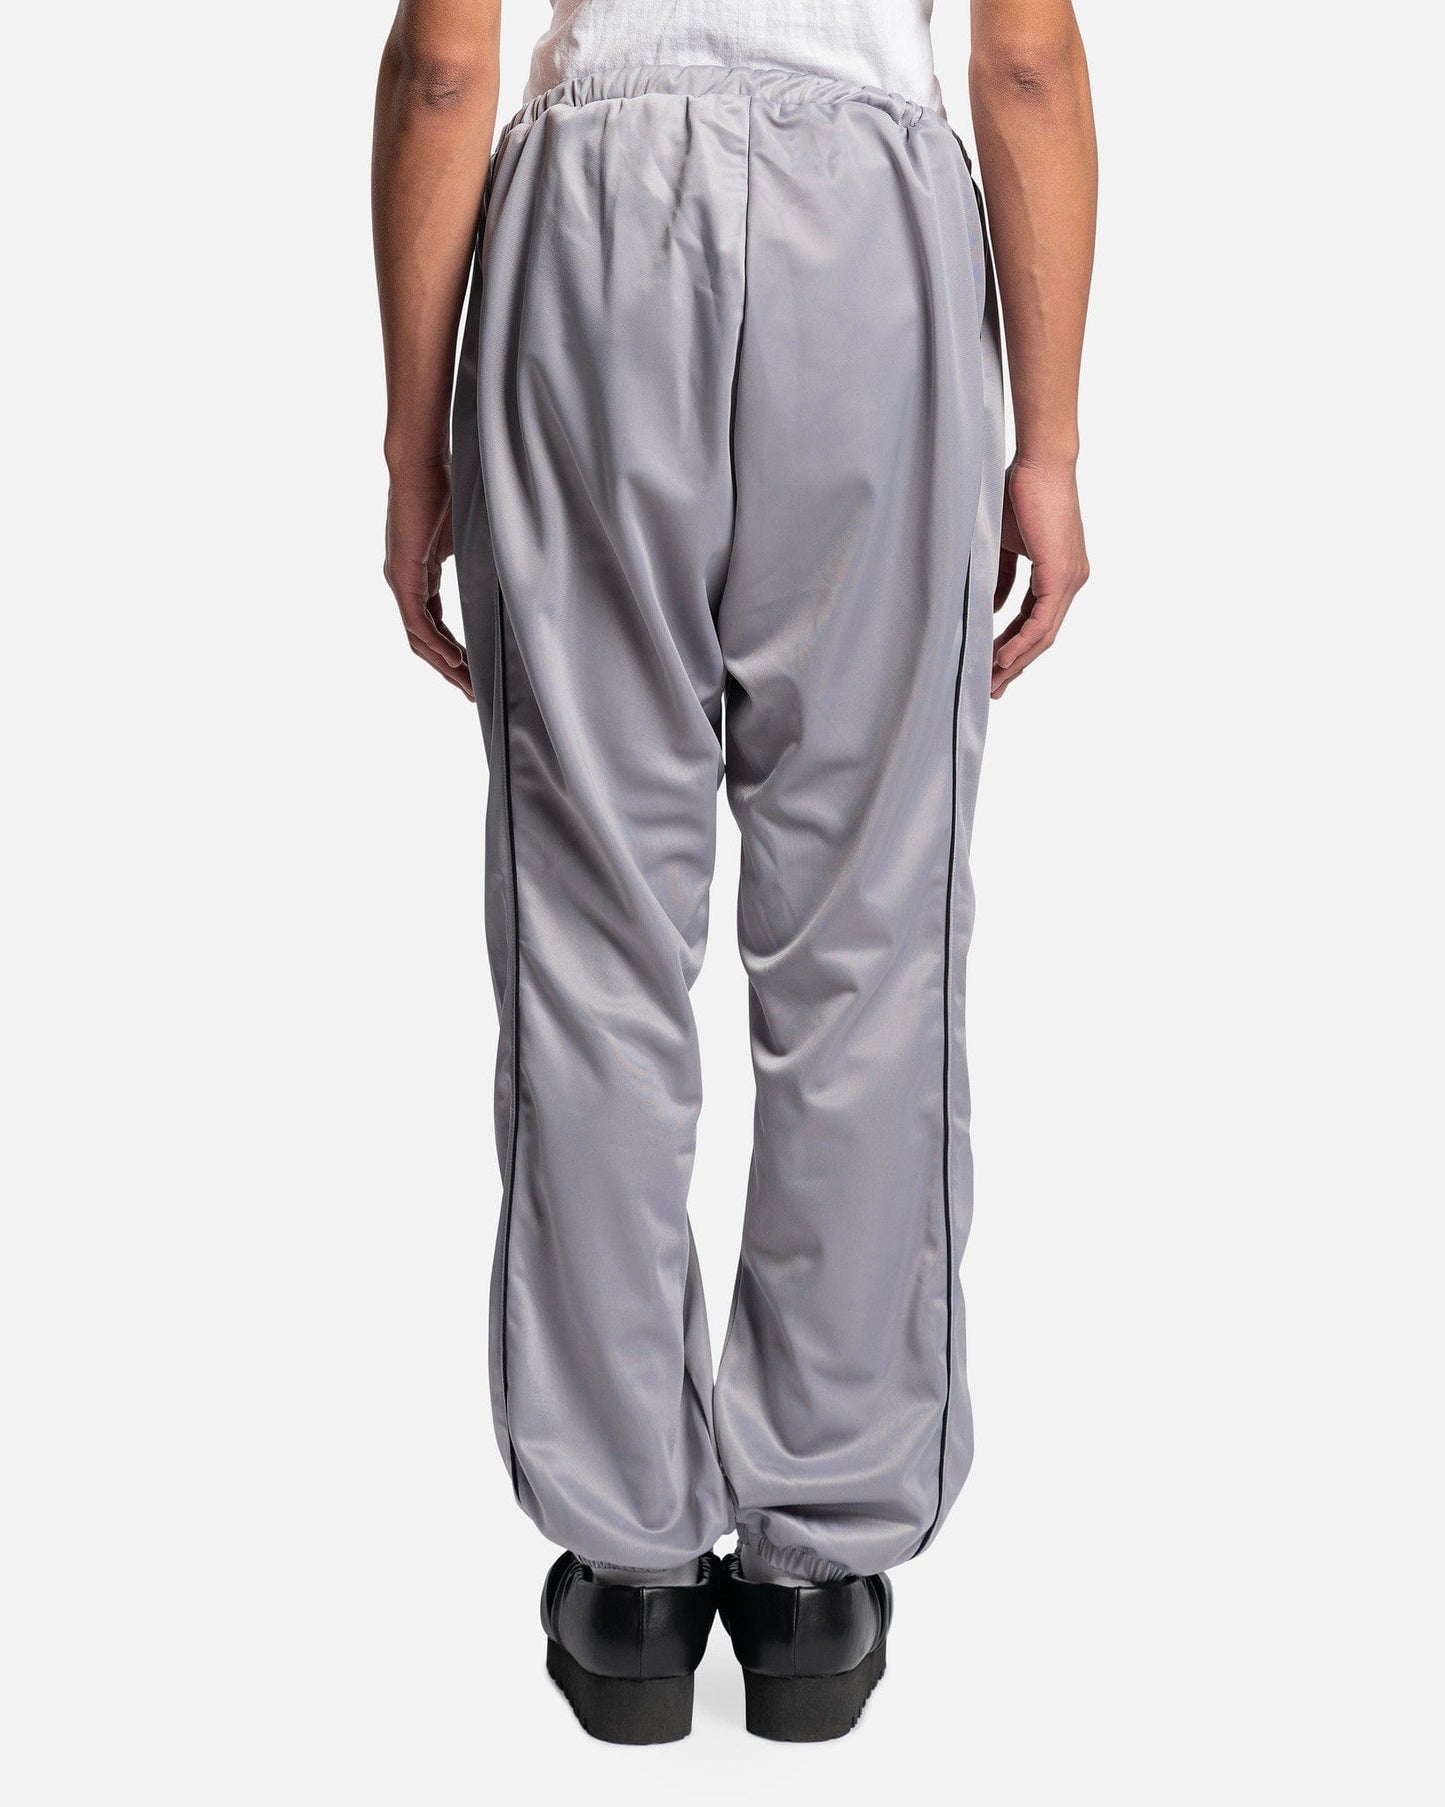 Willy Chavarria Men's Pants Buffalo Track Pant in Grey